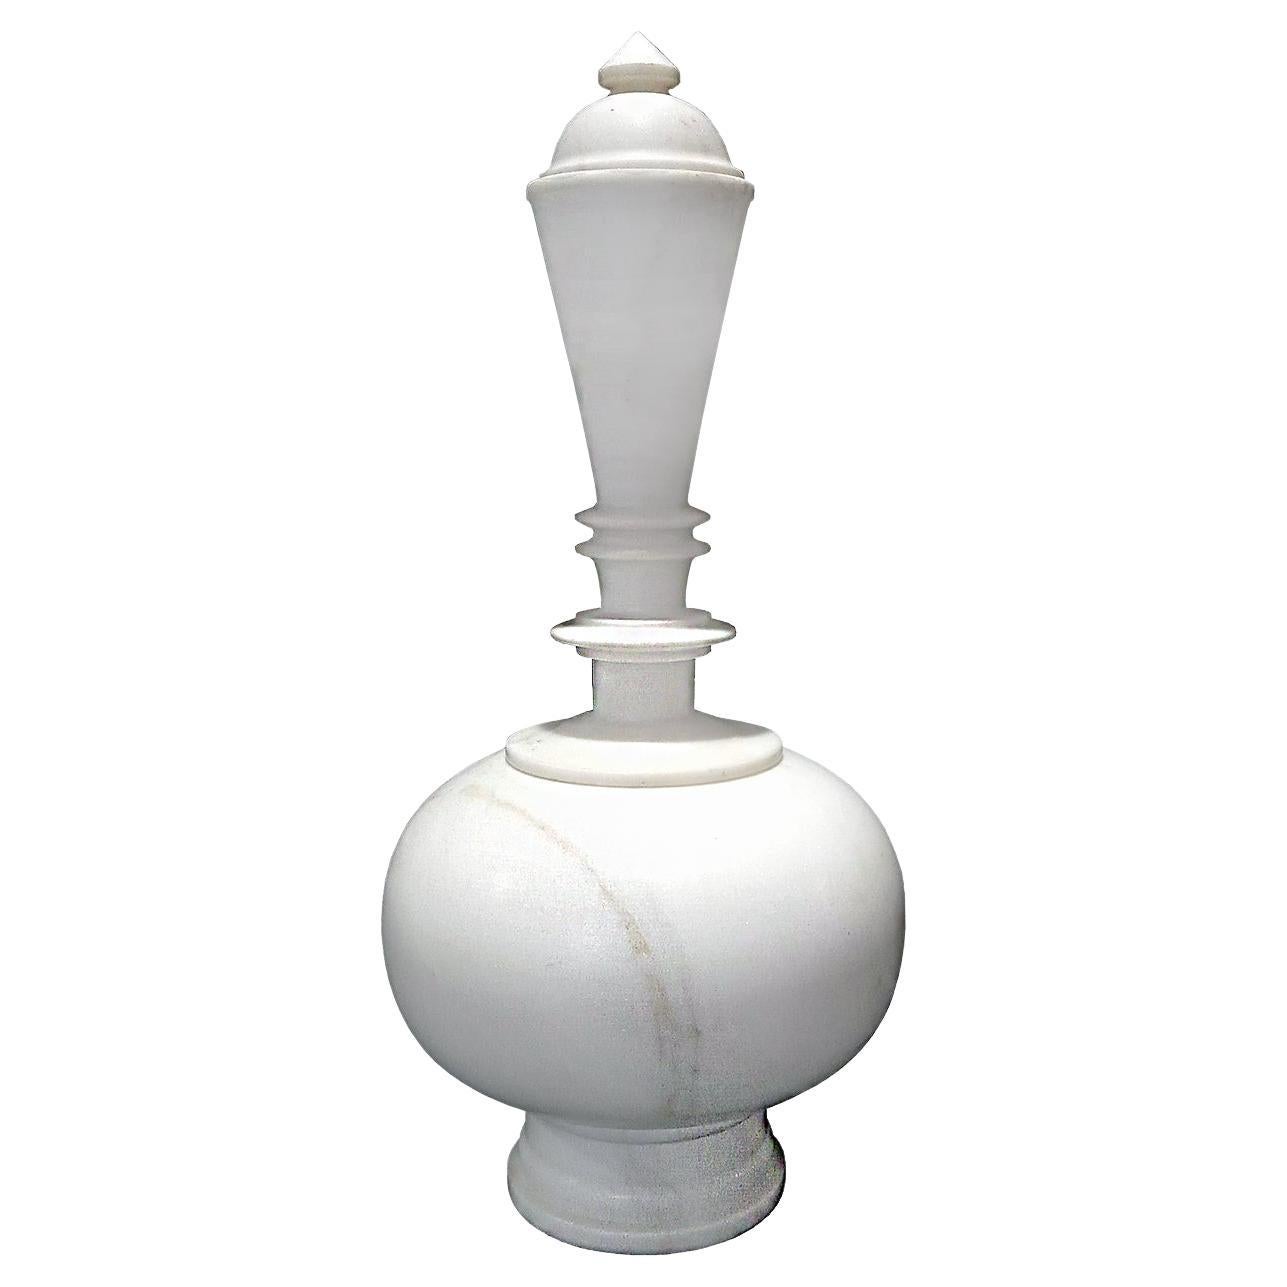 Hand-Carved Indian Marble Vase, with cap